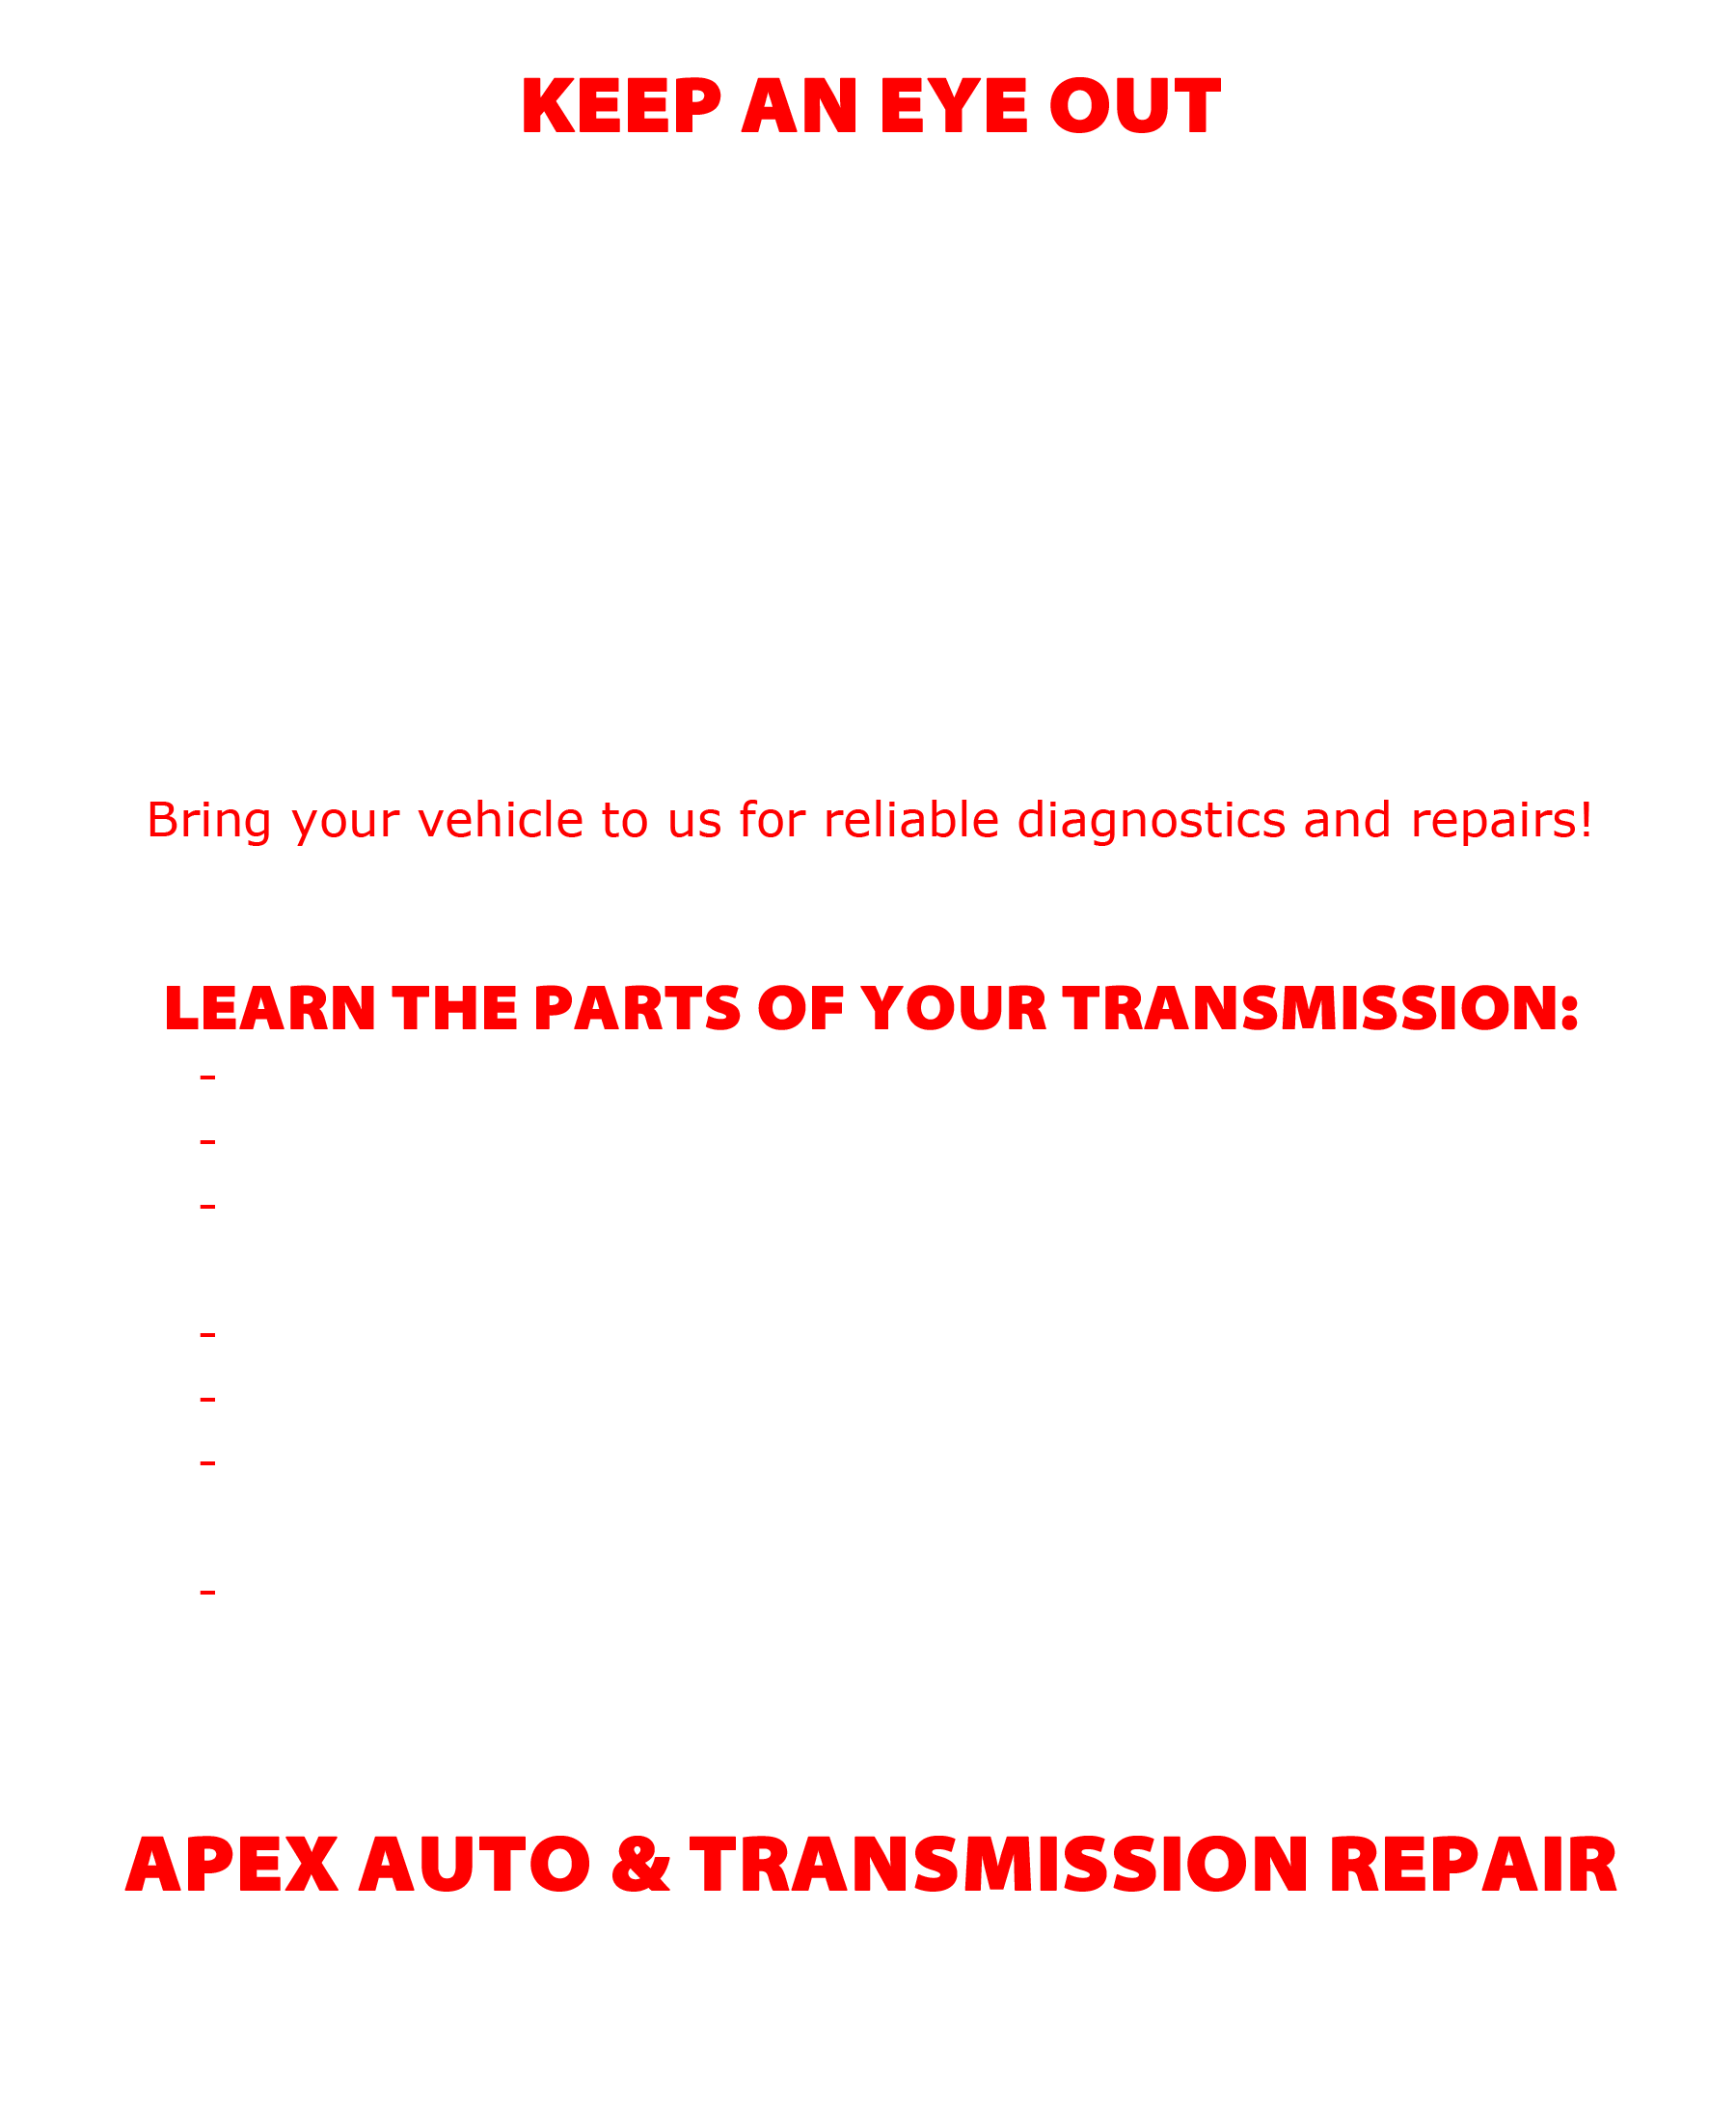 If you think there may be an issue with your transmission, there are a few symptoms to look for when driving. Stains or leaks under your vehicle, low or cloudy transmission fluid level, grinding noises, erratic and/or hard shifting, vibrations that are unusual,  or irregular RPMs, such as revving to high. Bring your vehicle to A.A.R.T for reliable diagnostics and repairs